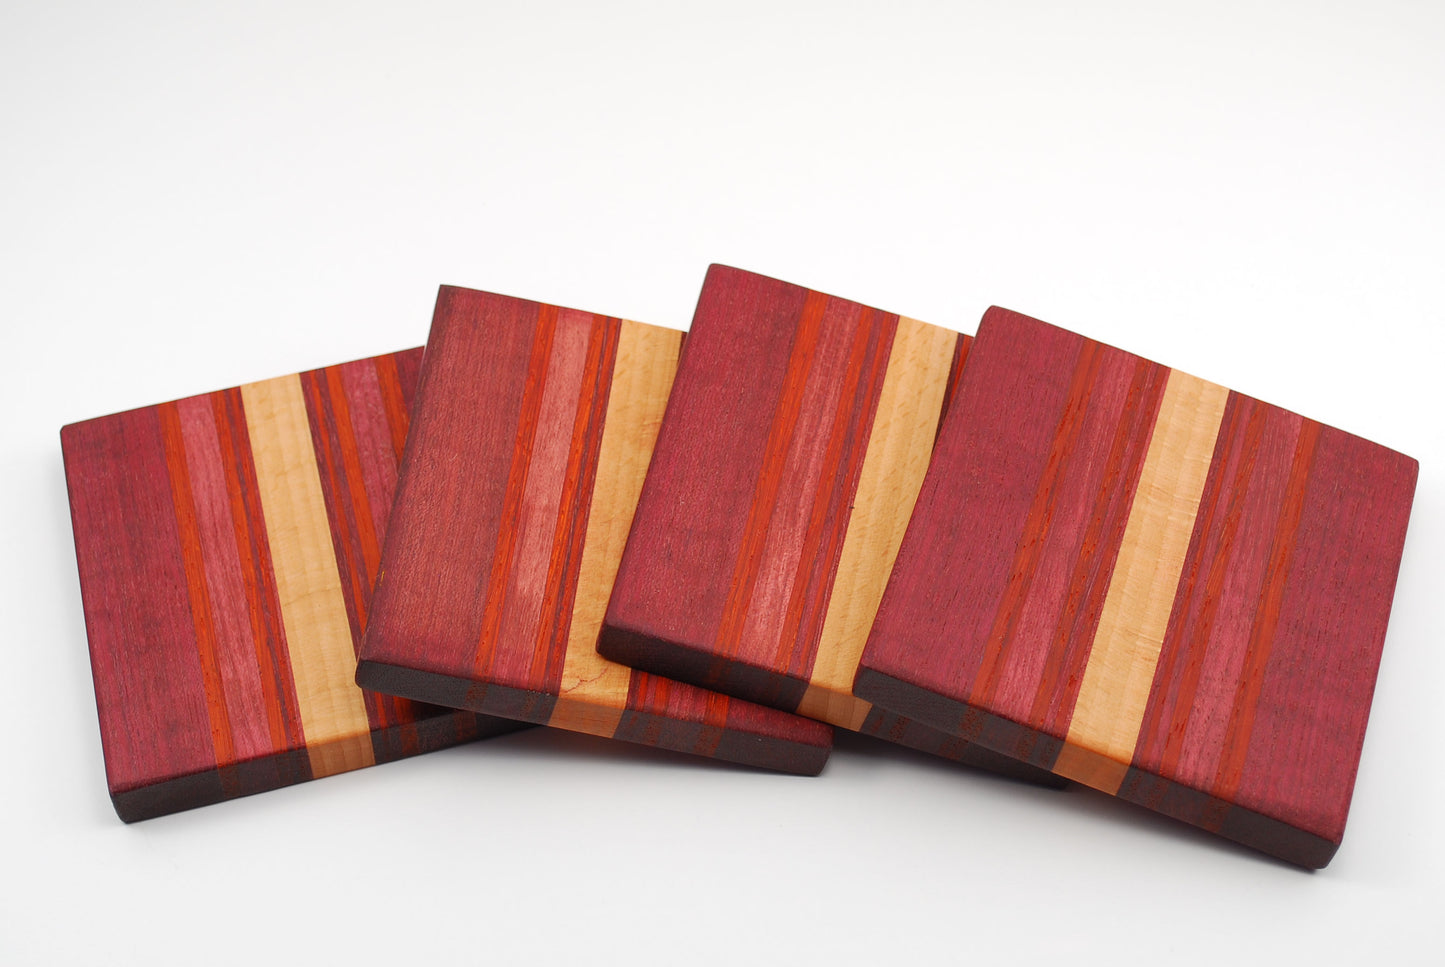 Set of 4 Coasters Made from Purple Heart, Paduk, Walnut and Maple Wood.